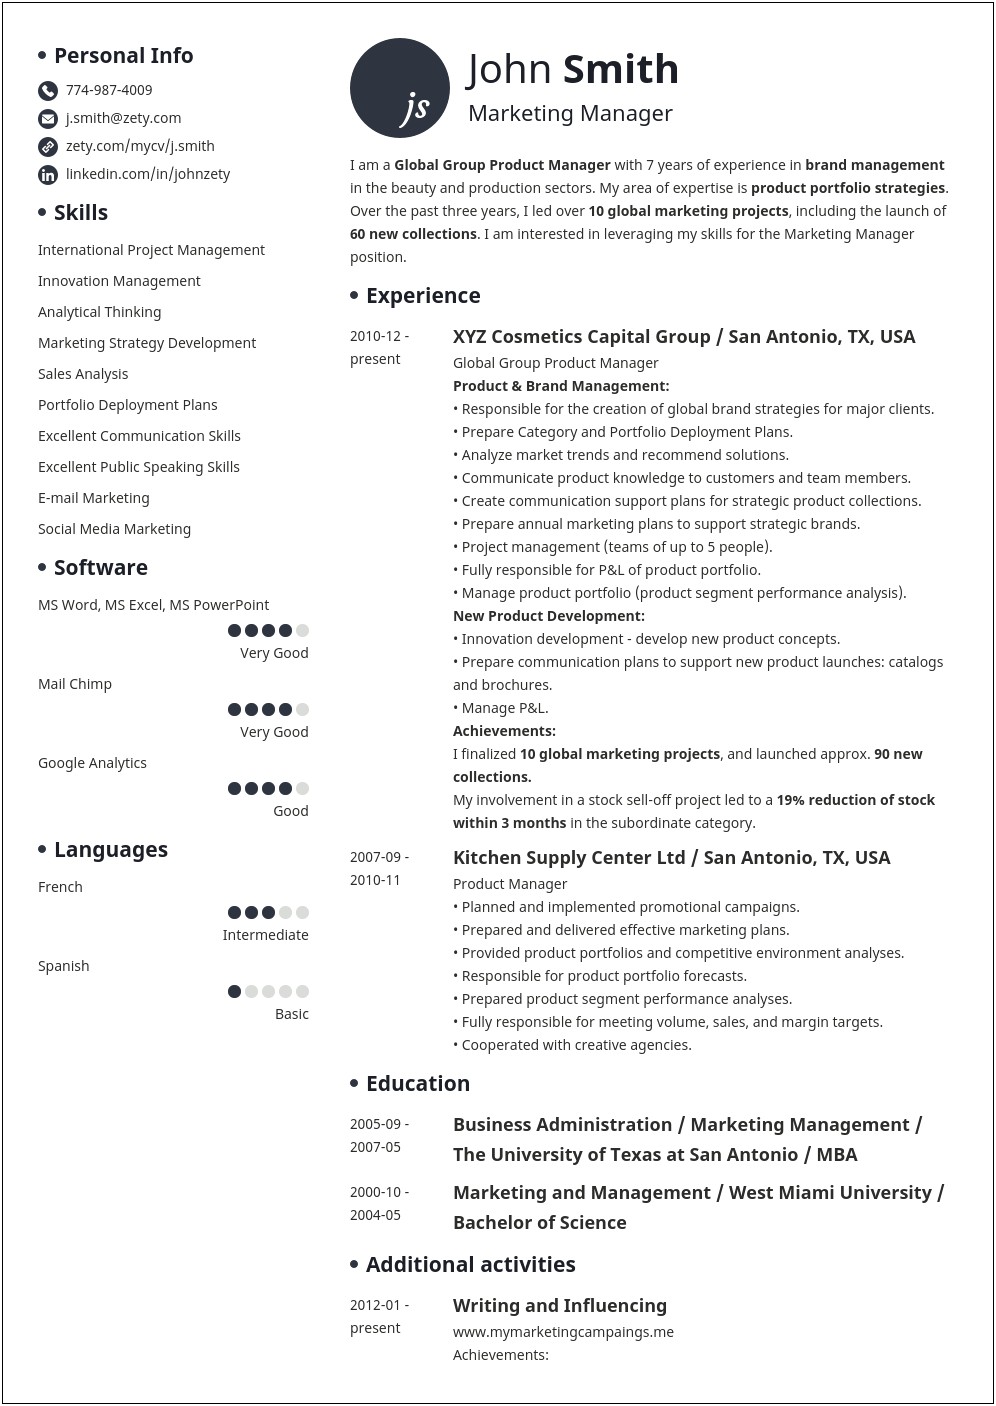 Experienced Hire Resume Put Education After Experience